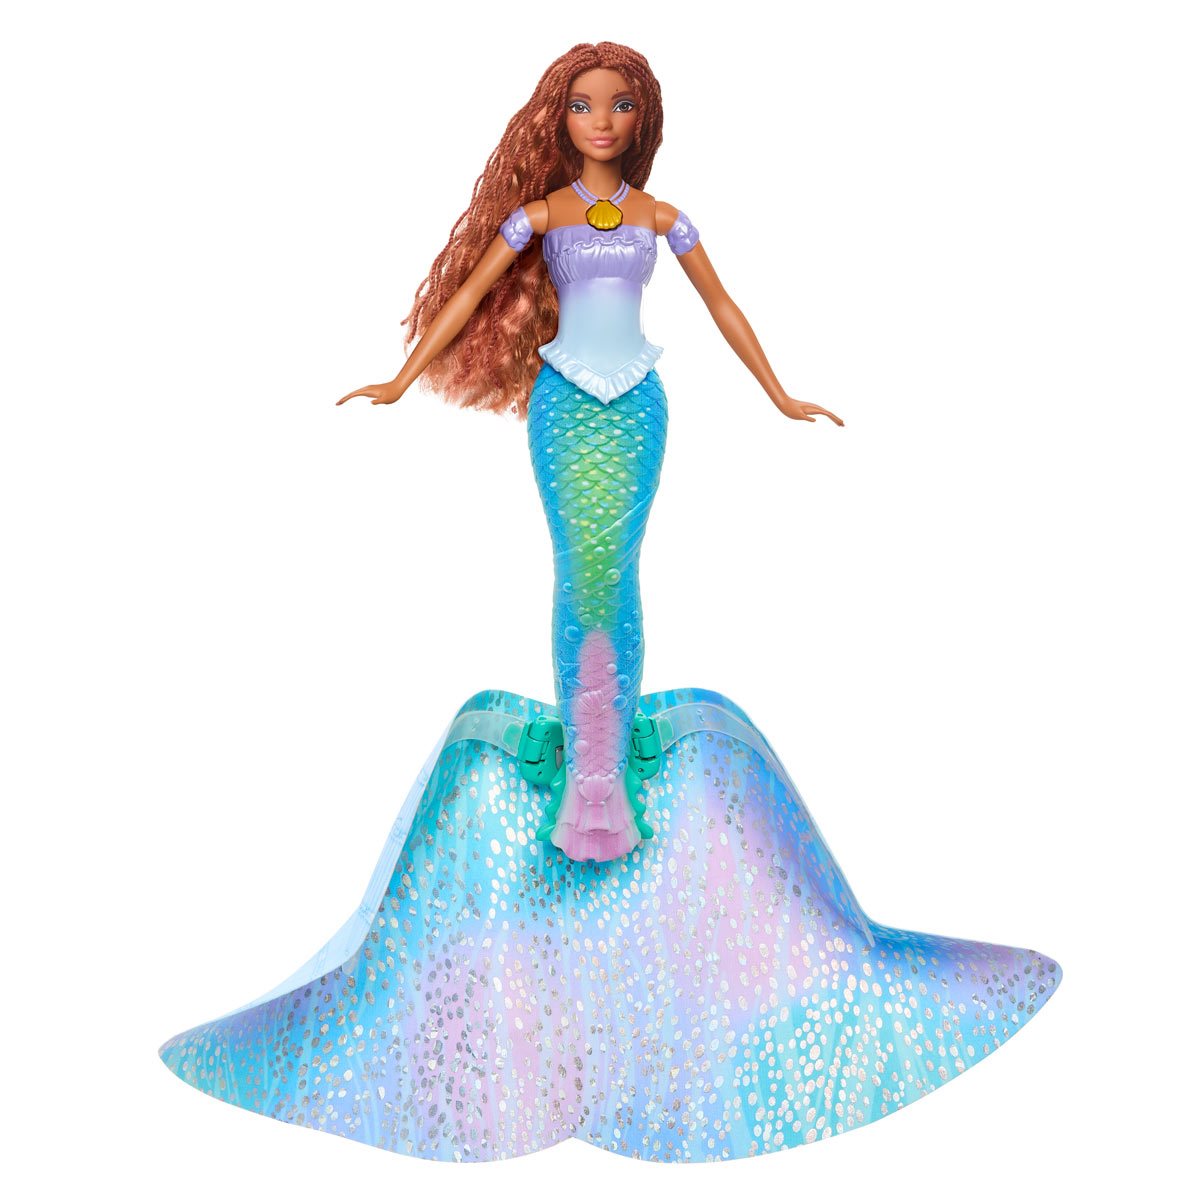 Mattel Ariel Fashion Doll on Land In Signature Blue Dress, Toys Inspired by  Disney's the Little Mermaid